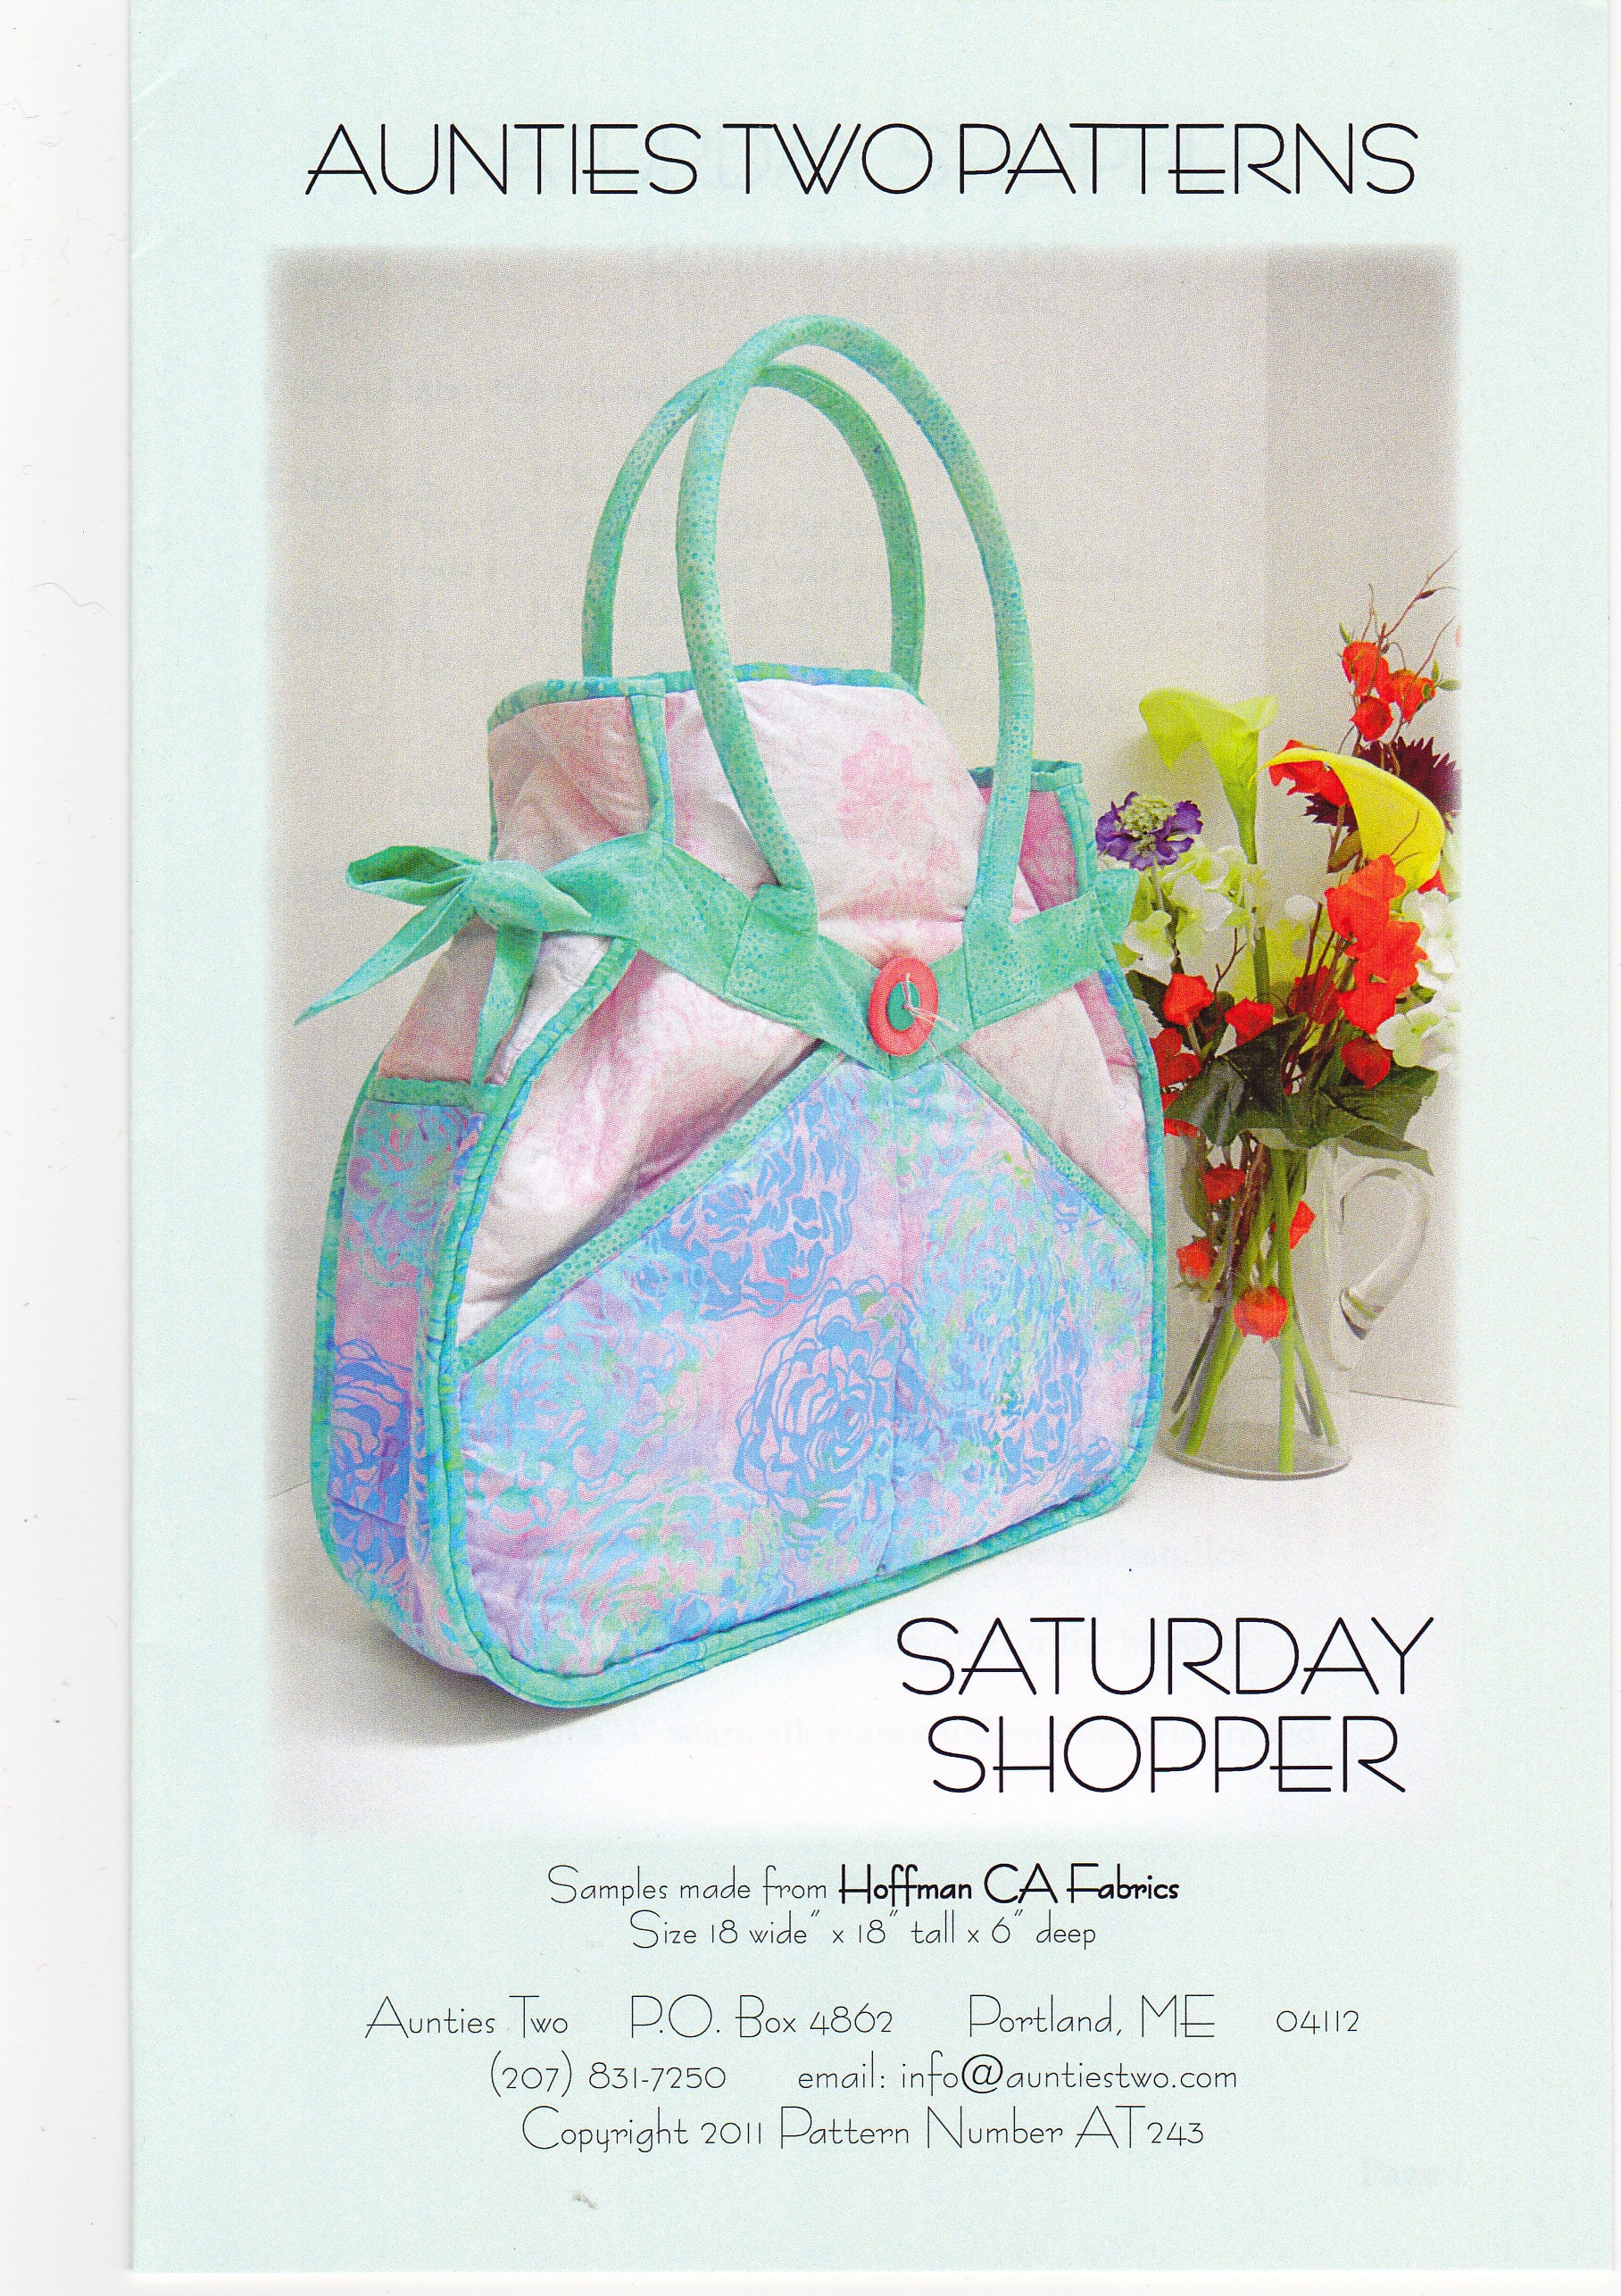 The Saturday Shopper Bag Sewing Pattern - Nonna's Notions N' Sew On